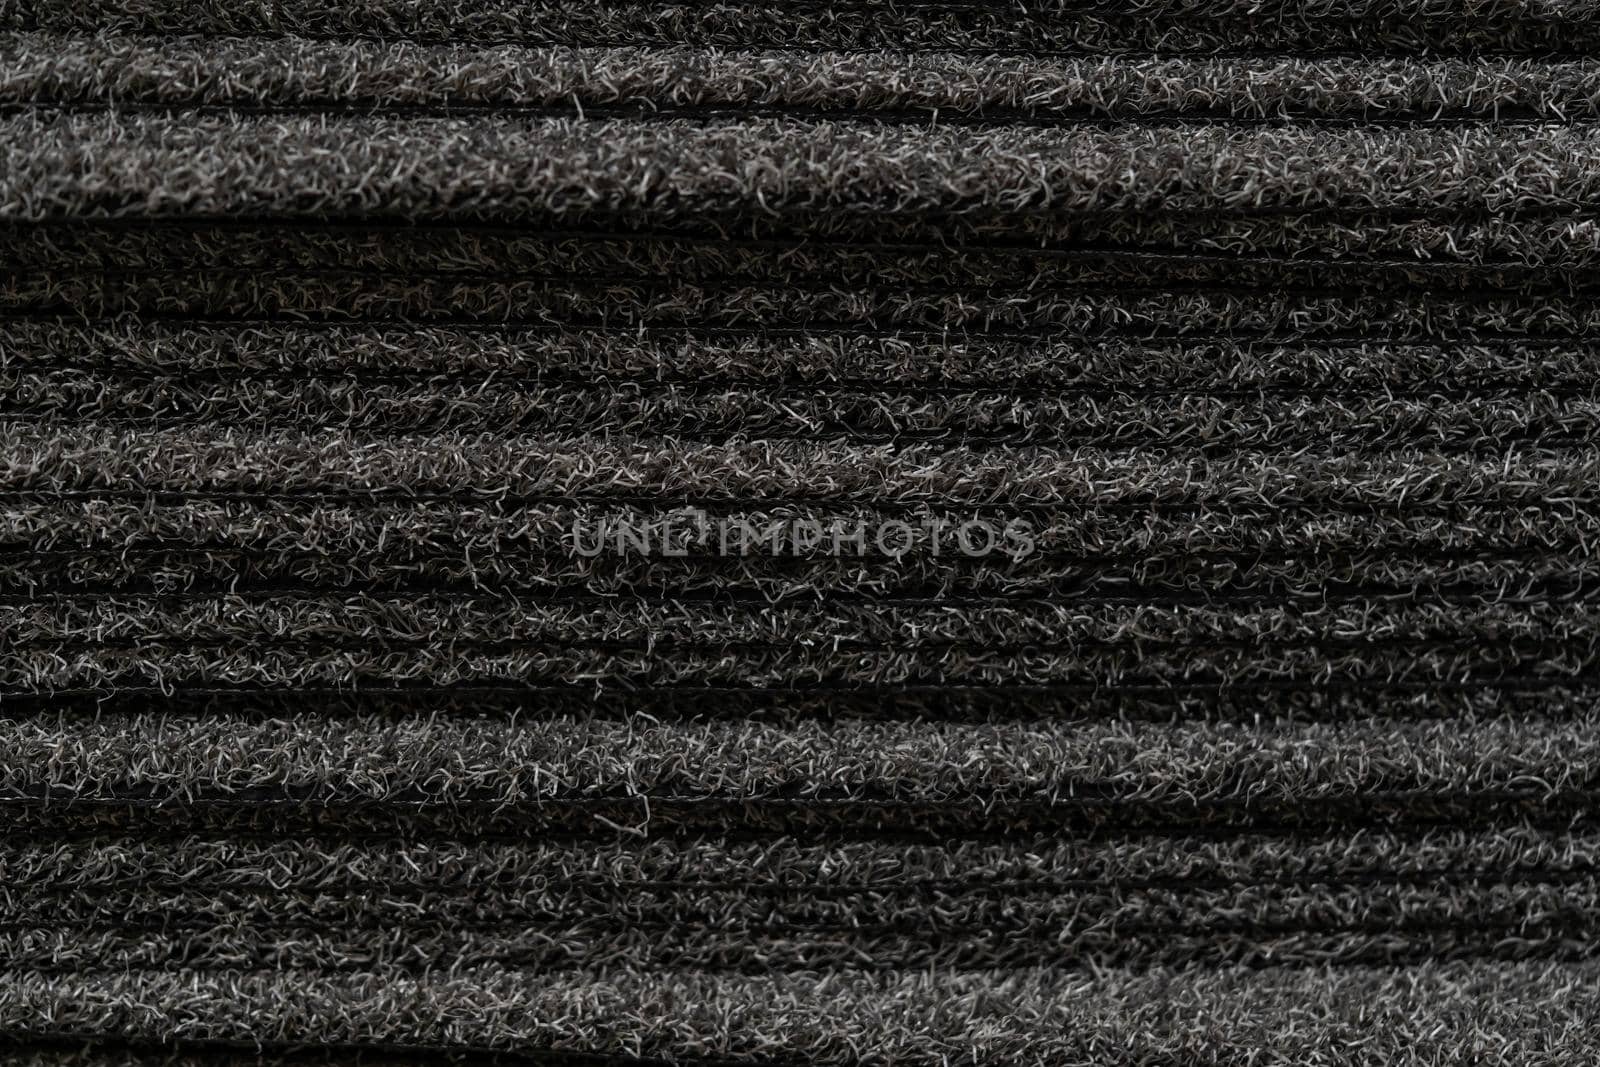 Black carpet for sale. Carpets placed on top of each other